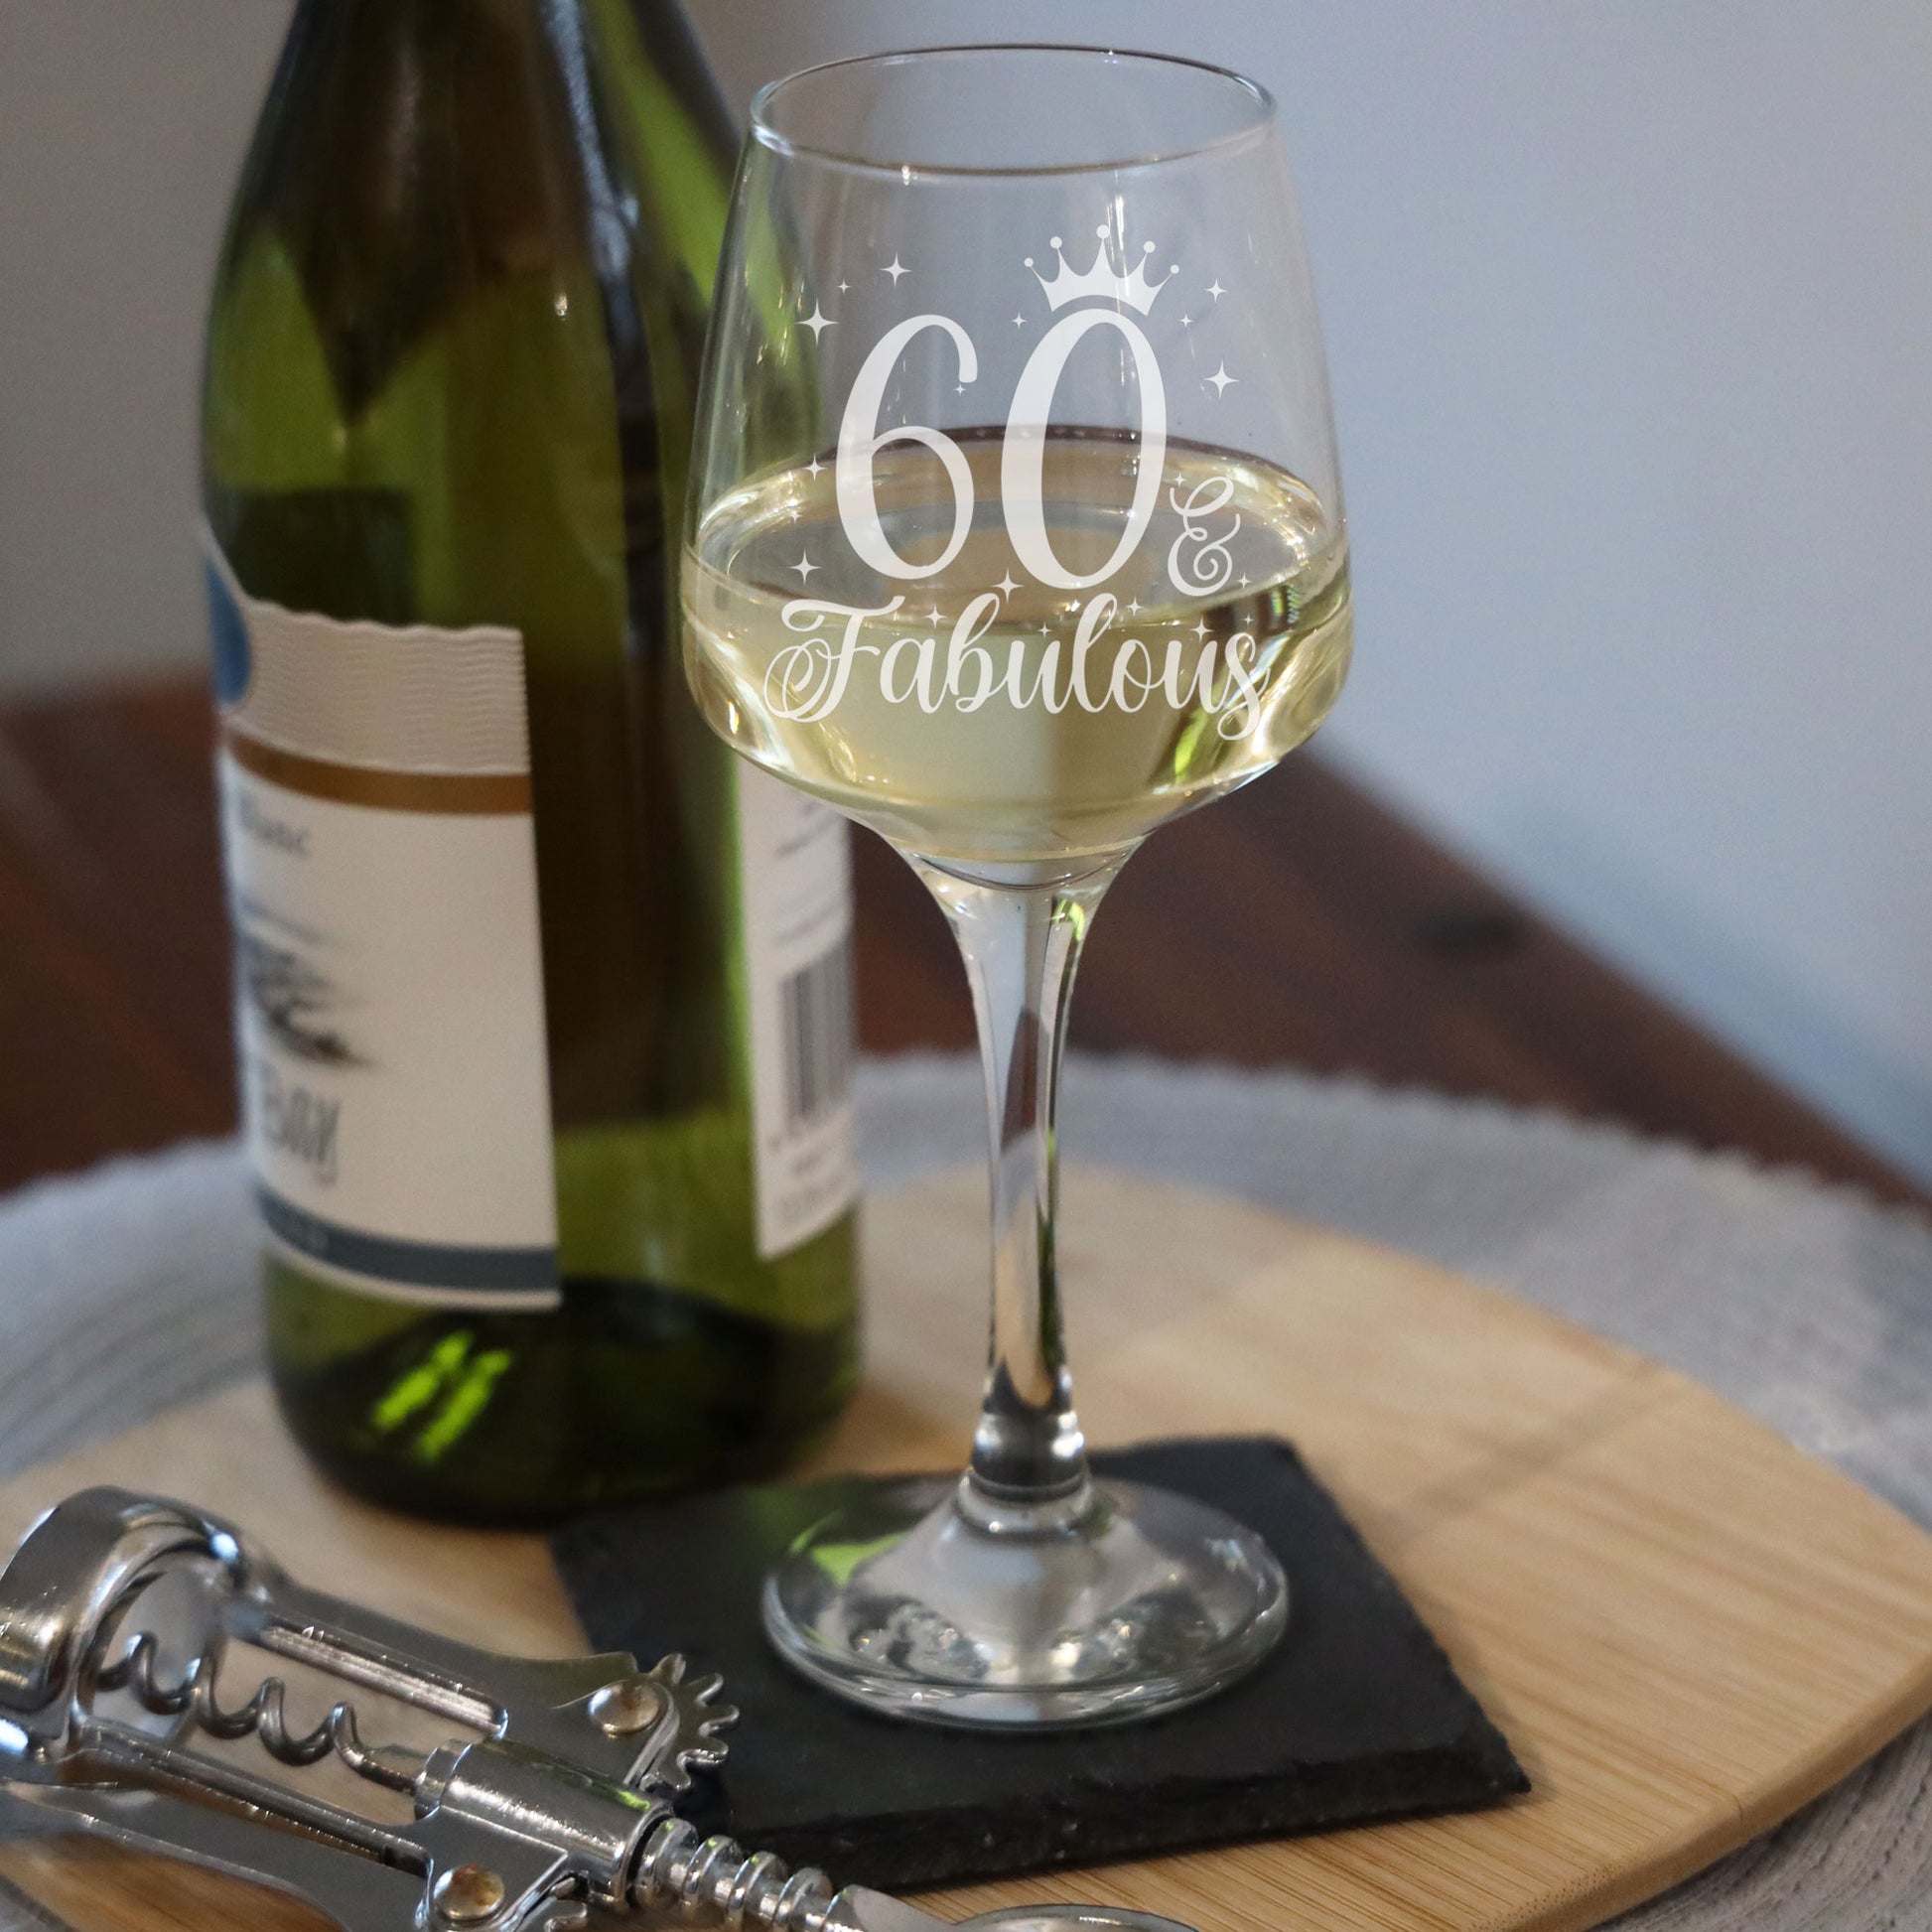 60 & Fabulous 60th Birthday Gift Engraved Wine Glass and/or Coaster Set  - Always Looking Good -   